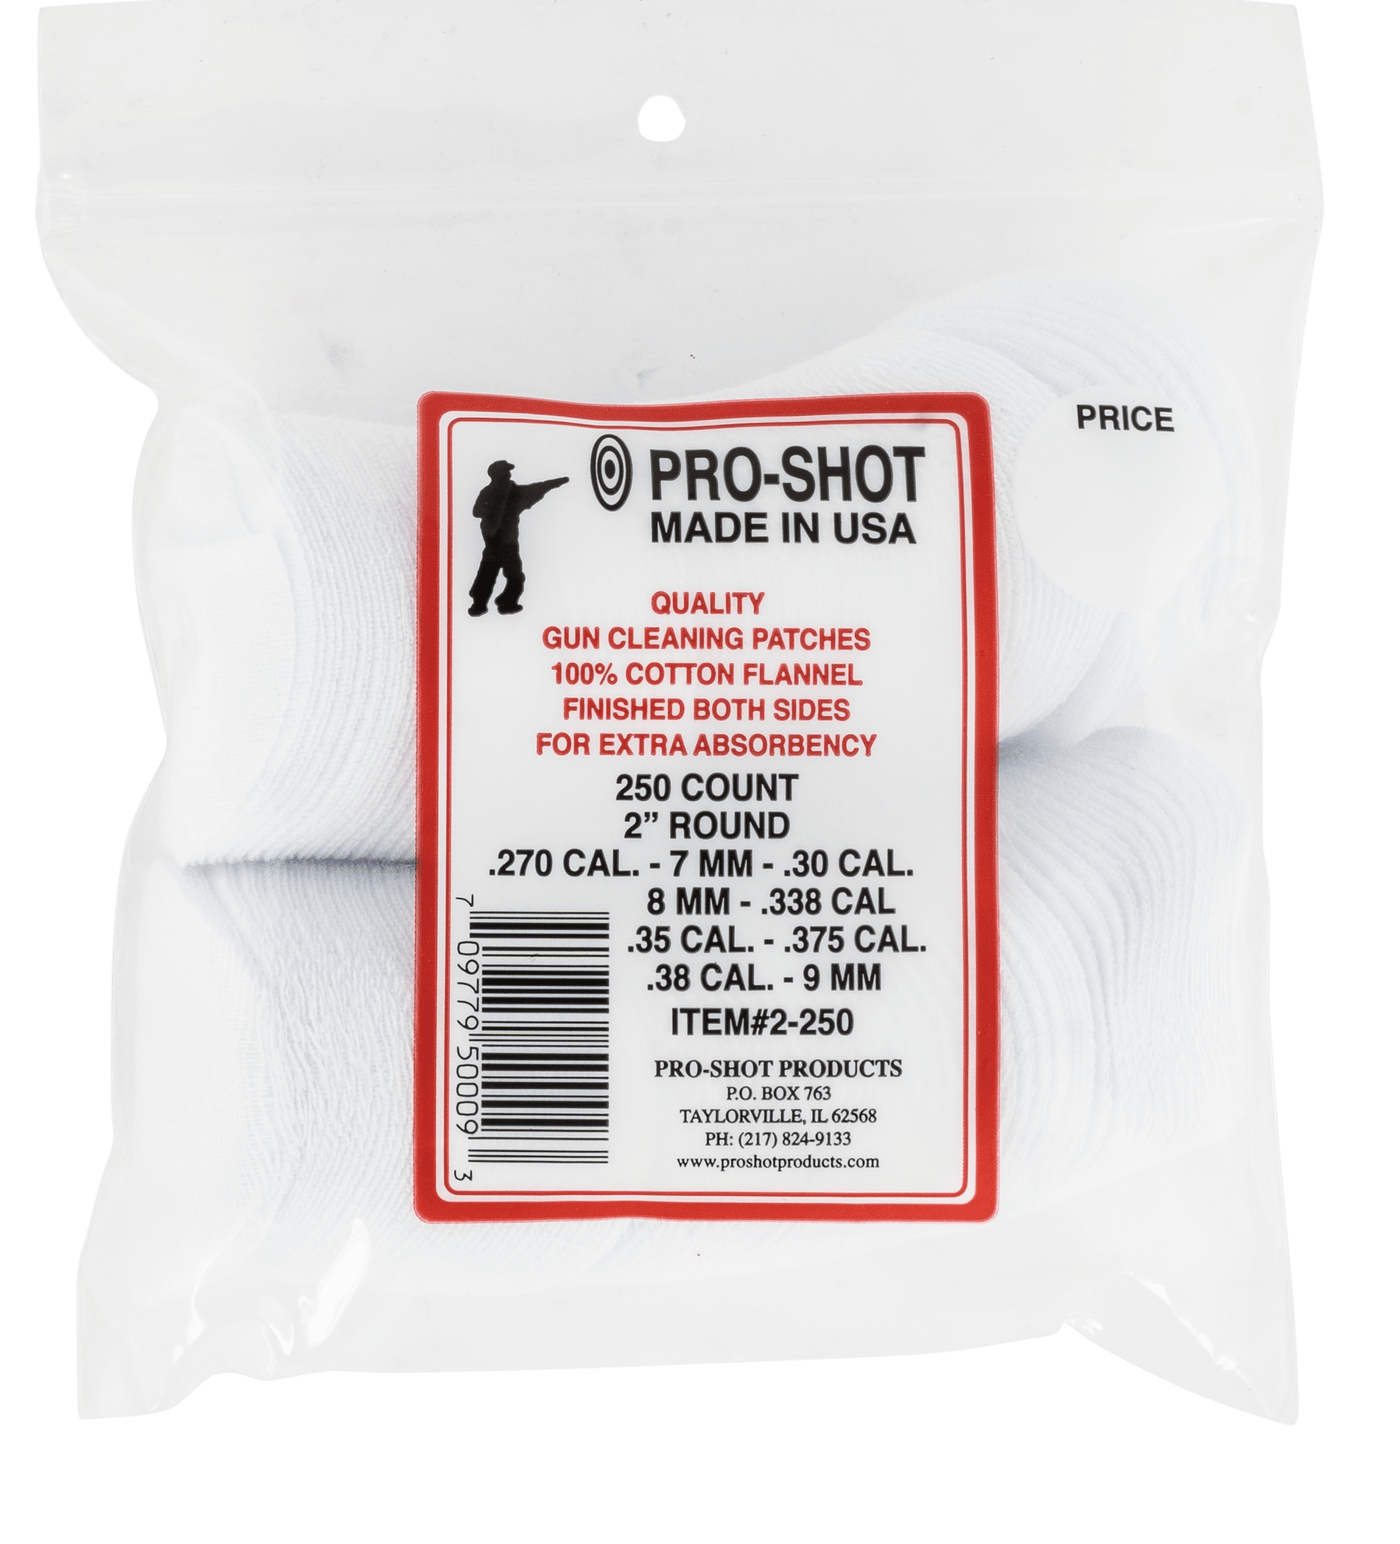 Pro-Shot Products Pro-shot Patch 270-38 Cal 2" 250pk Cleaning Equipment